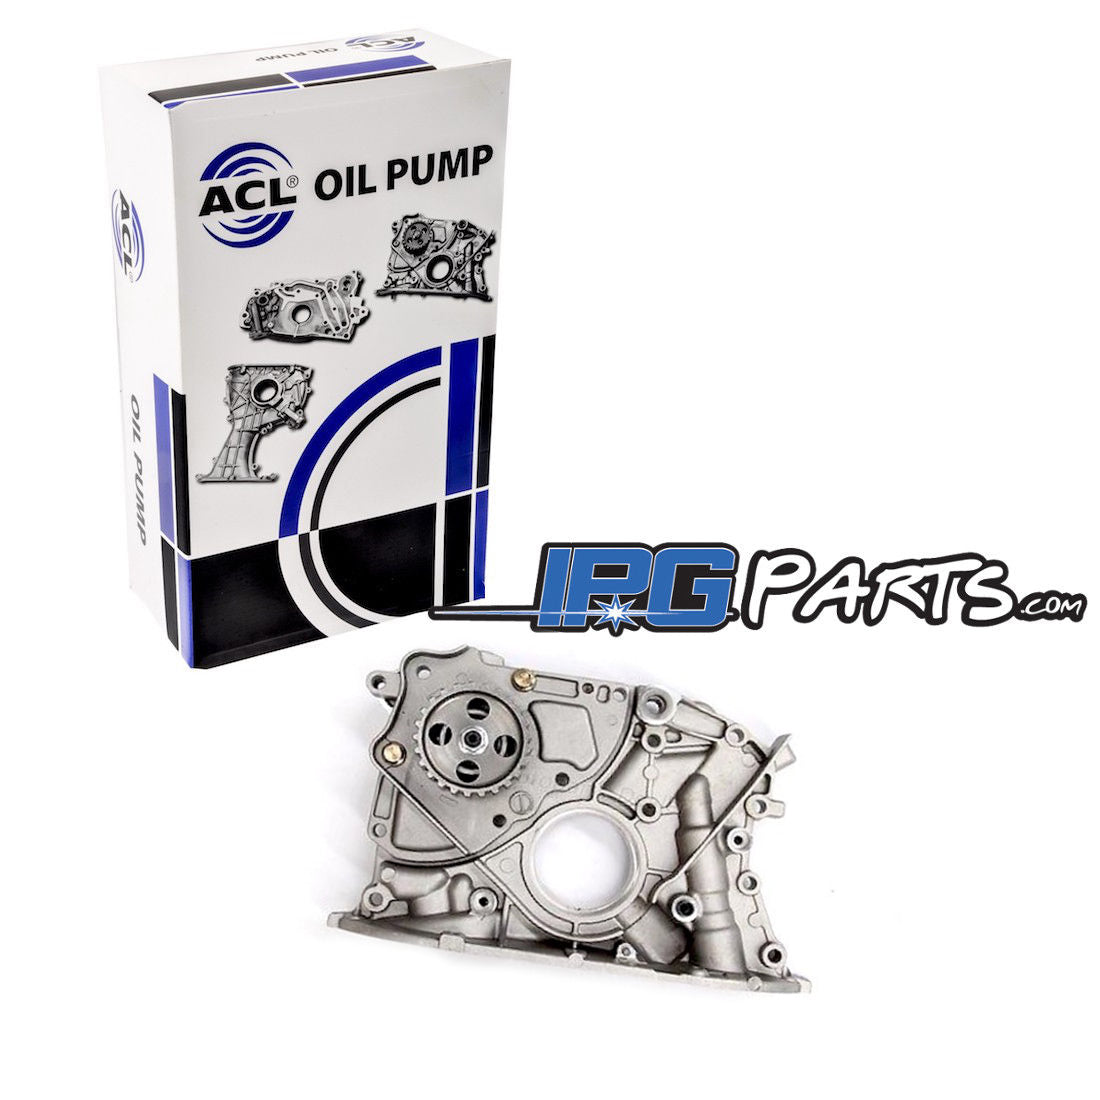 ACL Performance Orbit Oil Pump fits 1991-1995 Toyota MR2 3SGTE Turbocharged Engines